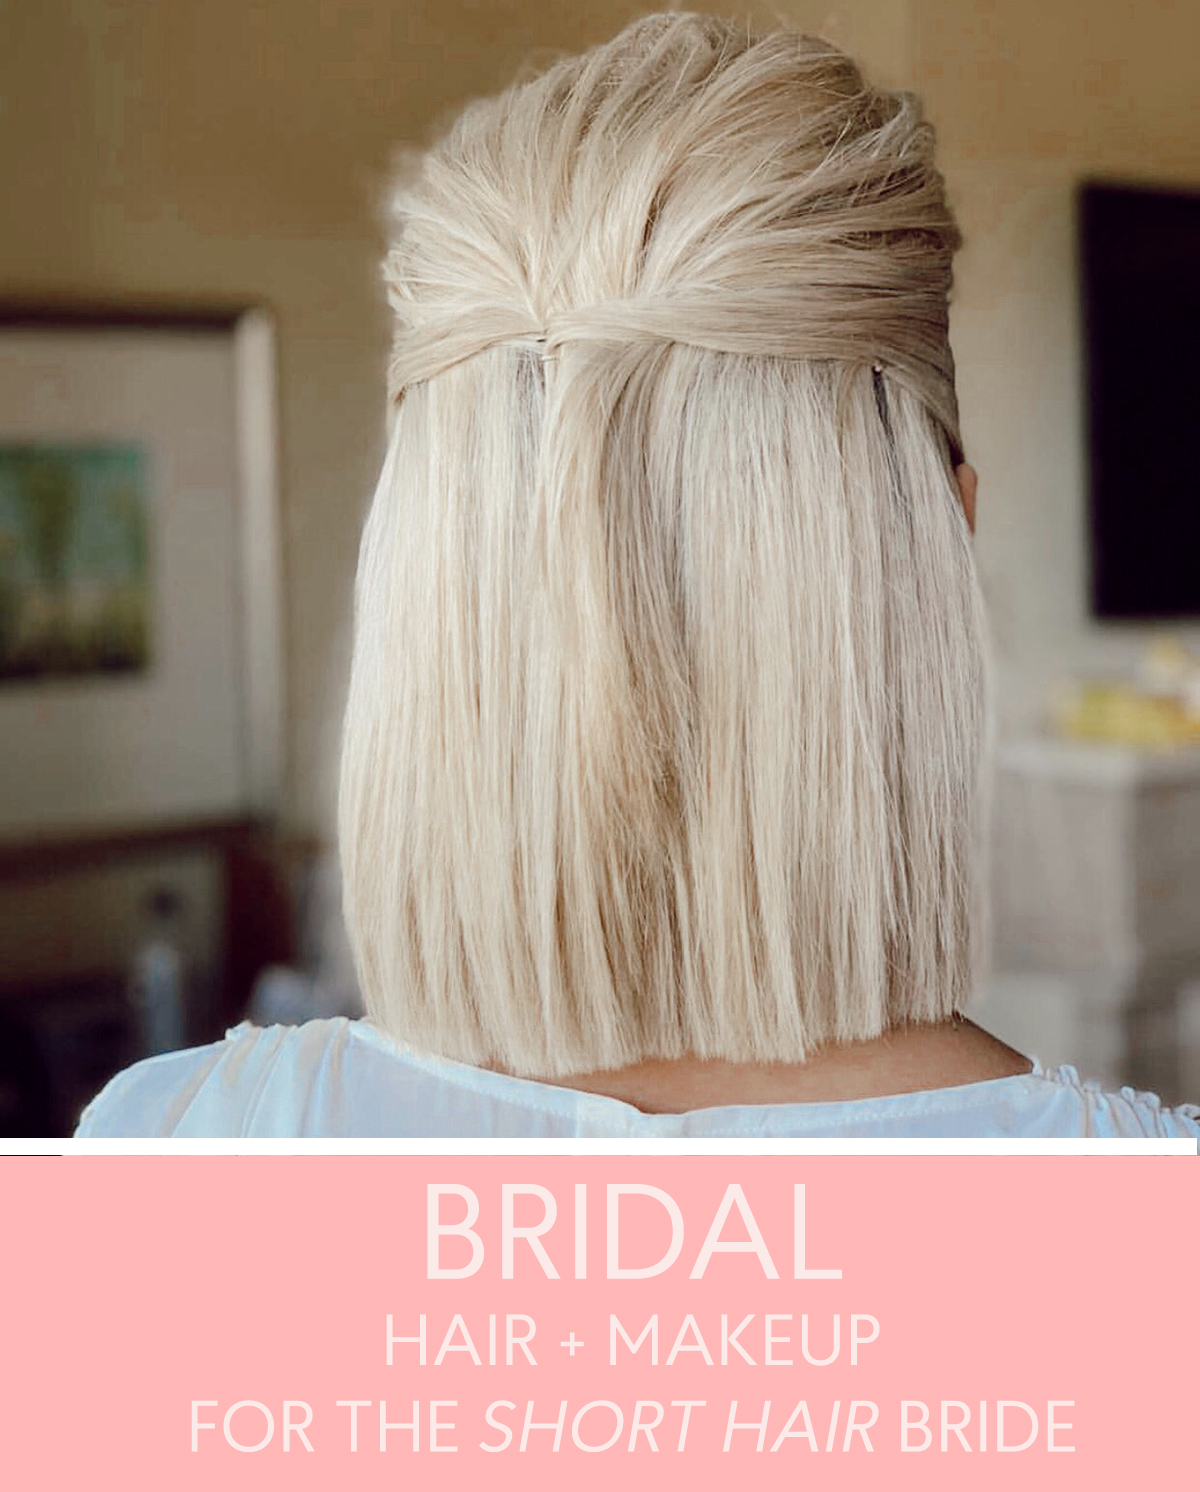 hair and makeup ideas for a bride with short hair